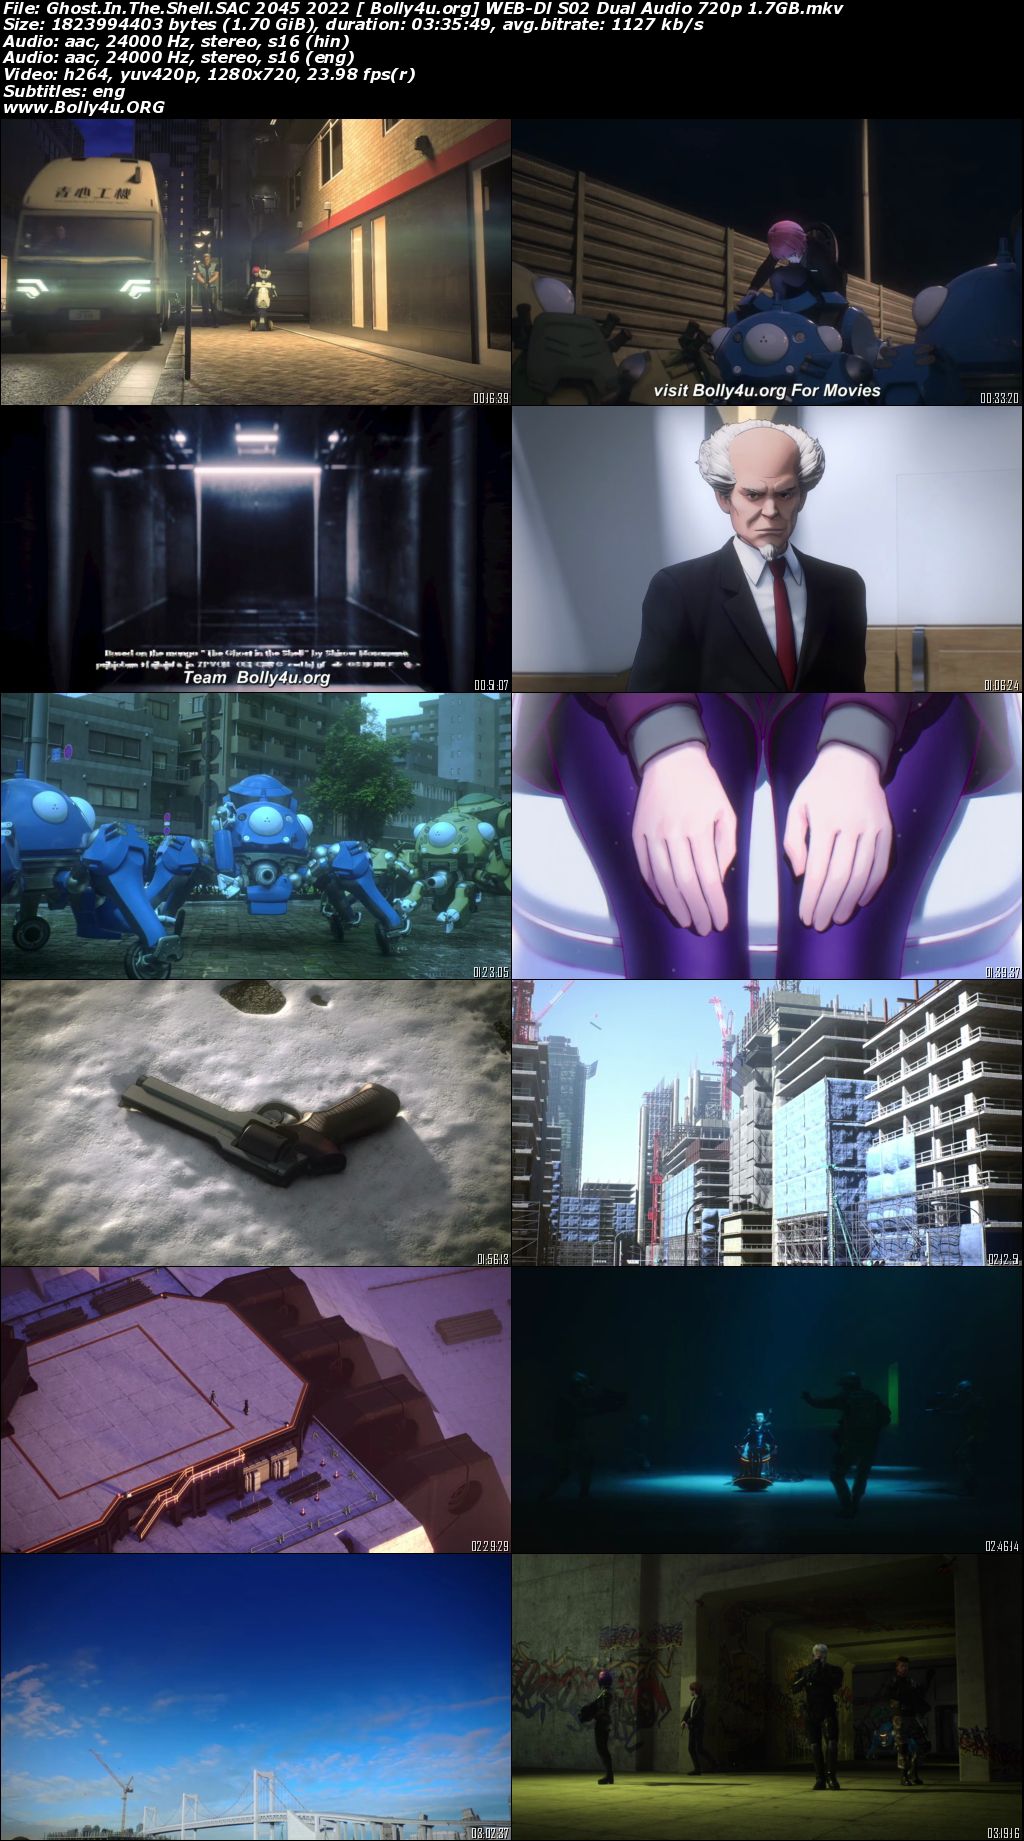 Ghost In The Shell SAC 2045 2022 WEB-DL S02 Hindi Dual Audio 720p 480p